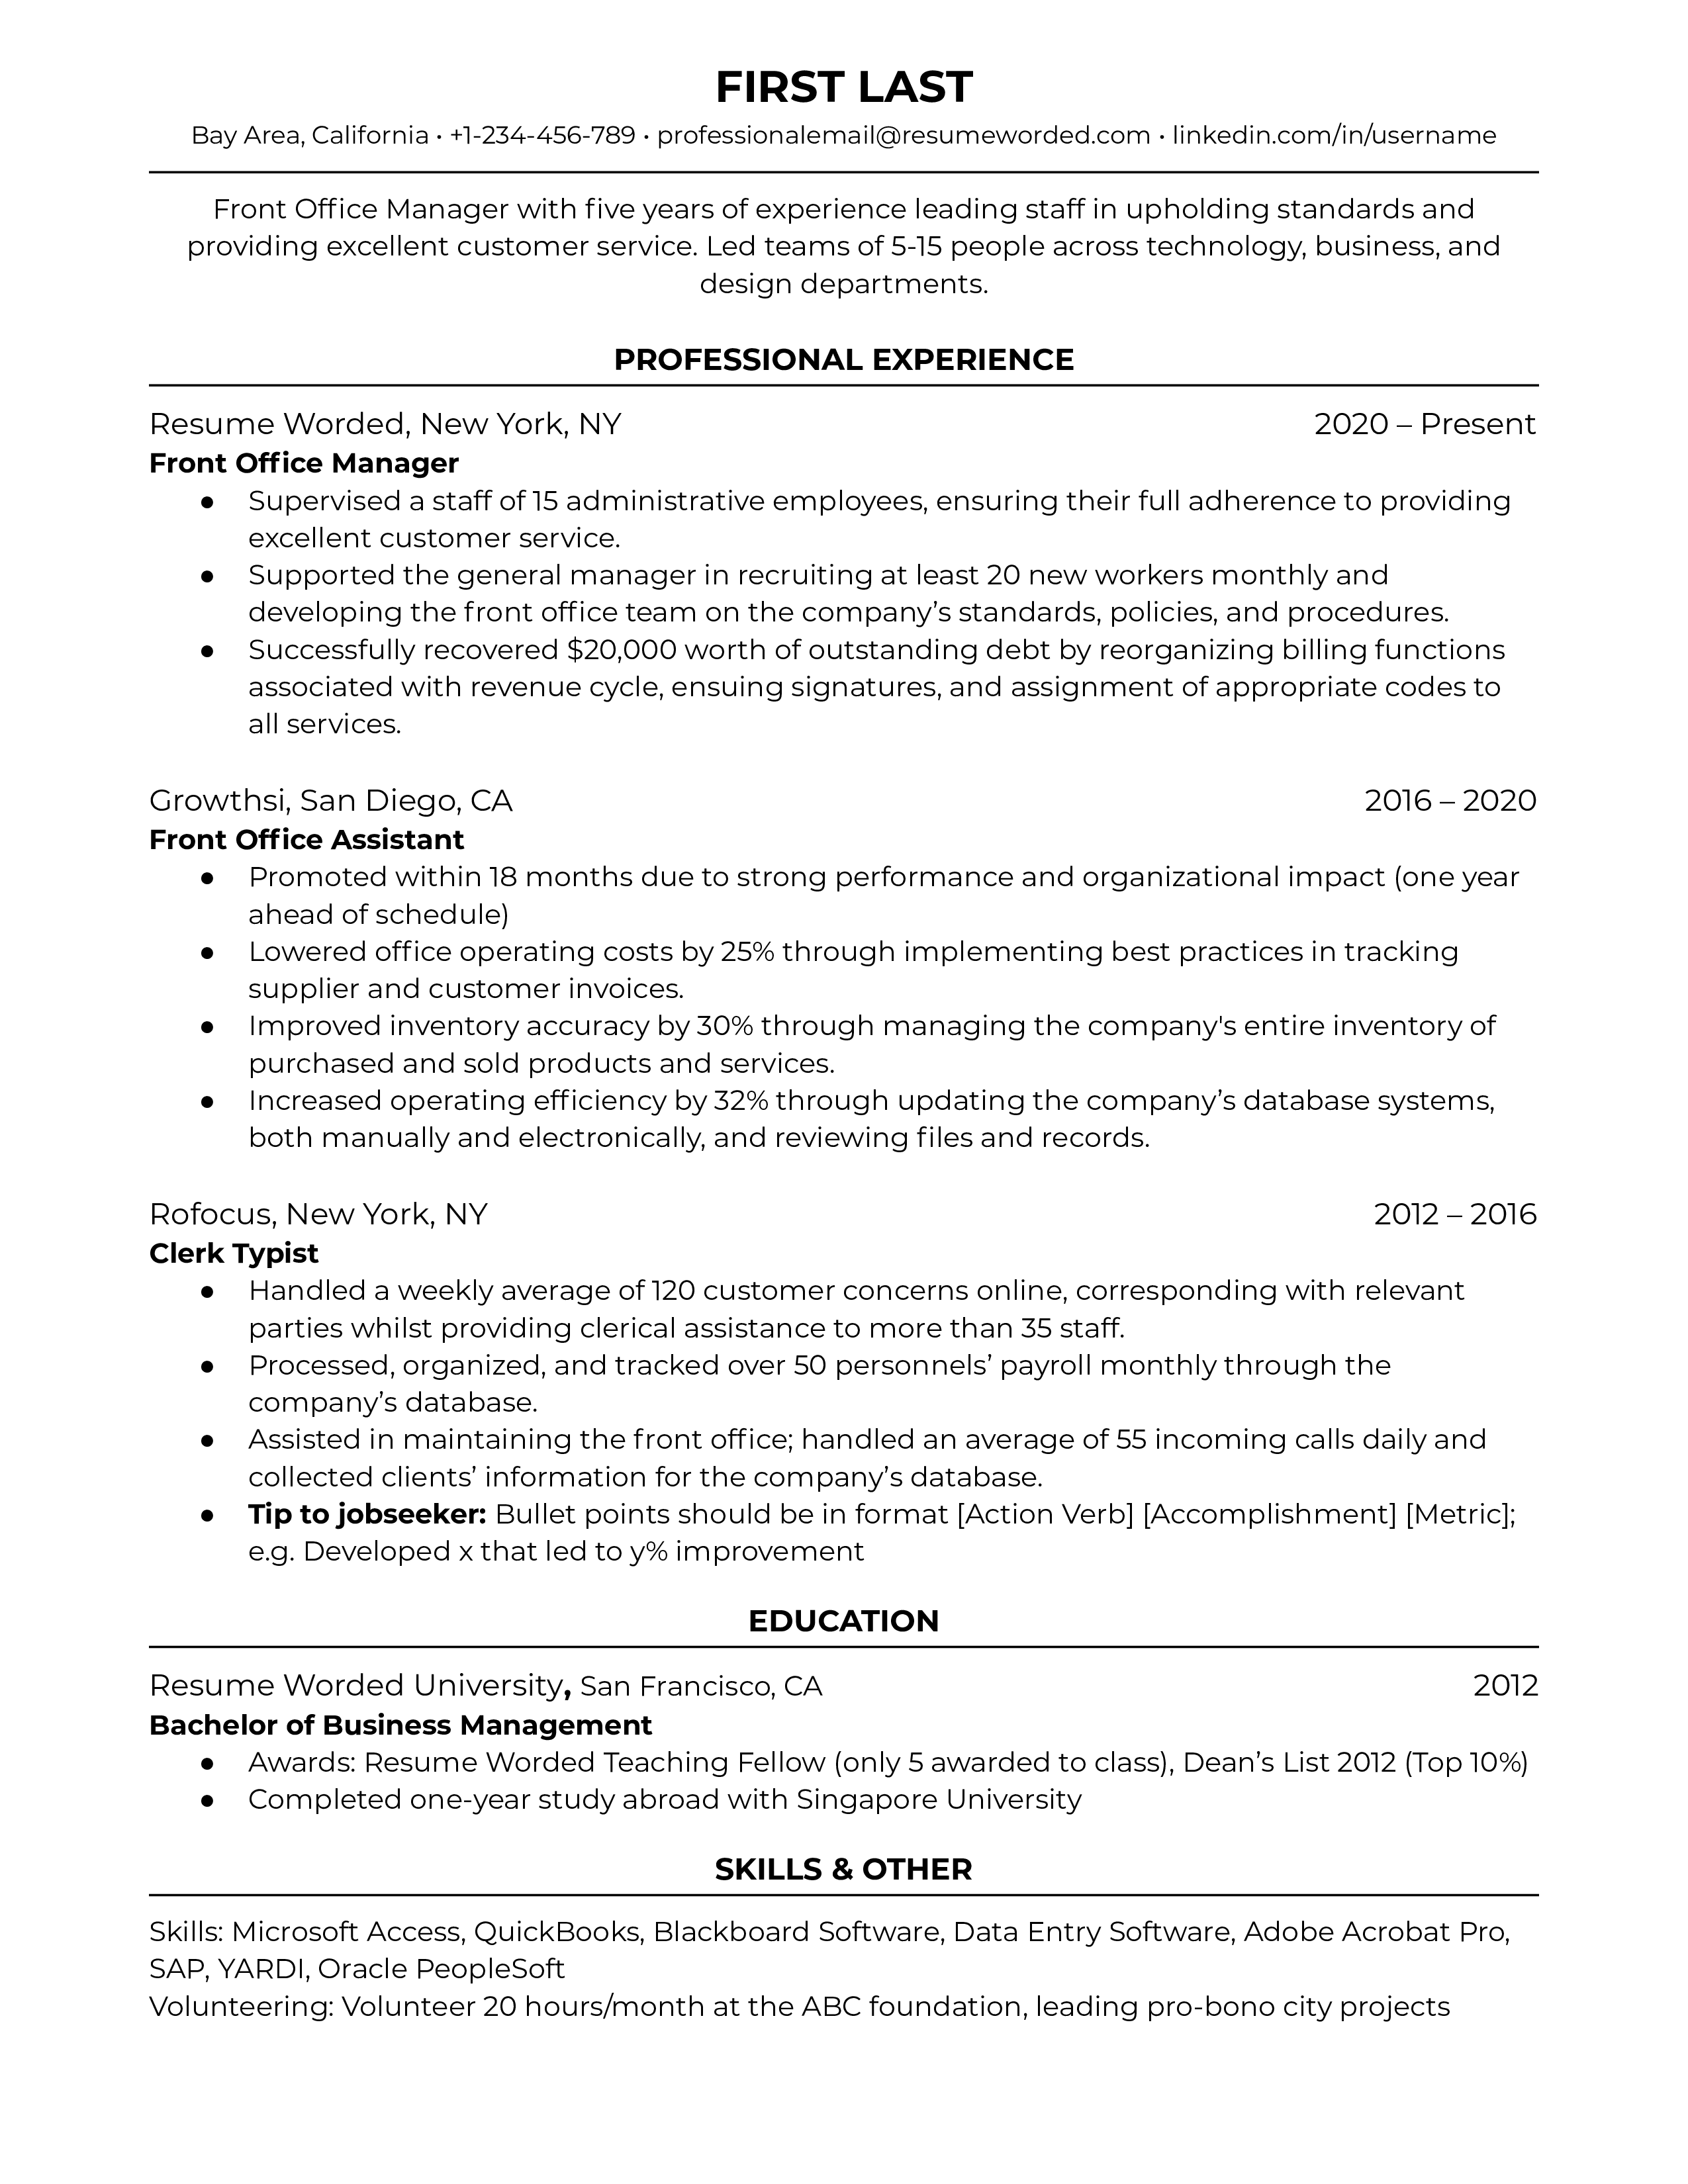 Front Office Manager Resume Sample